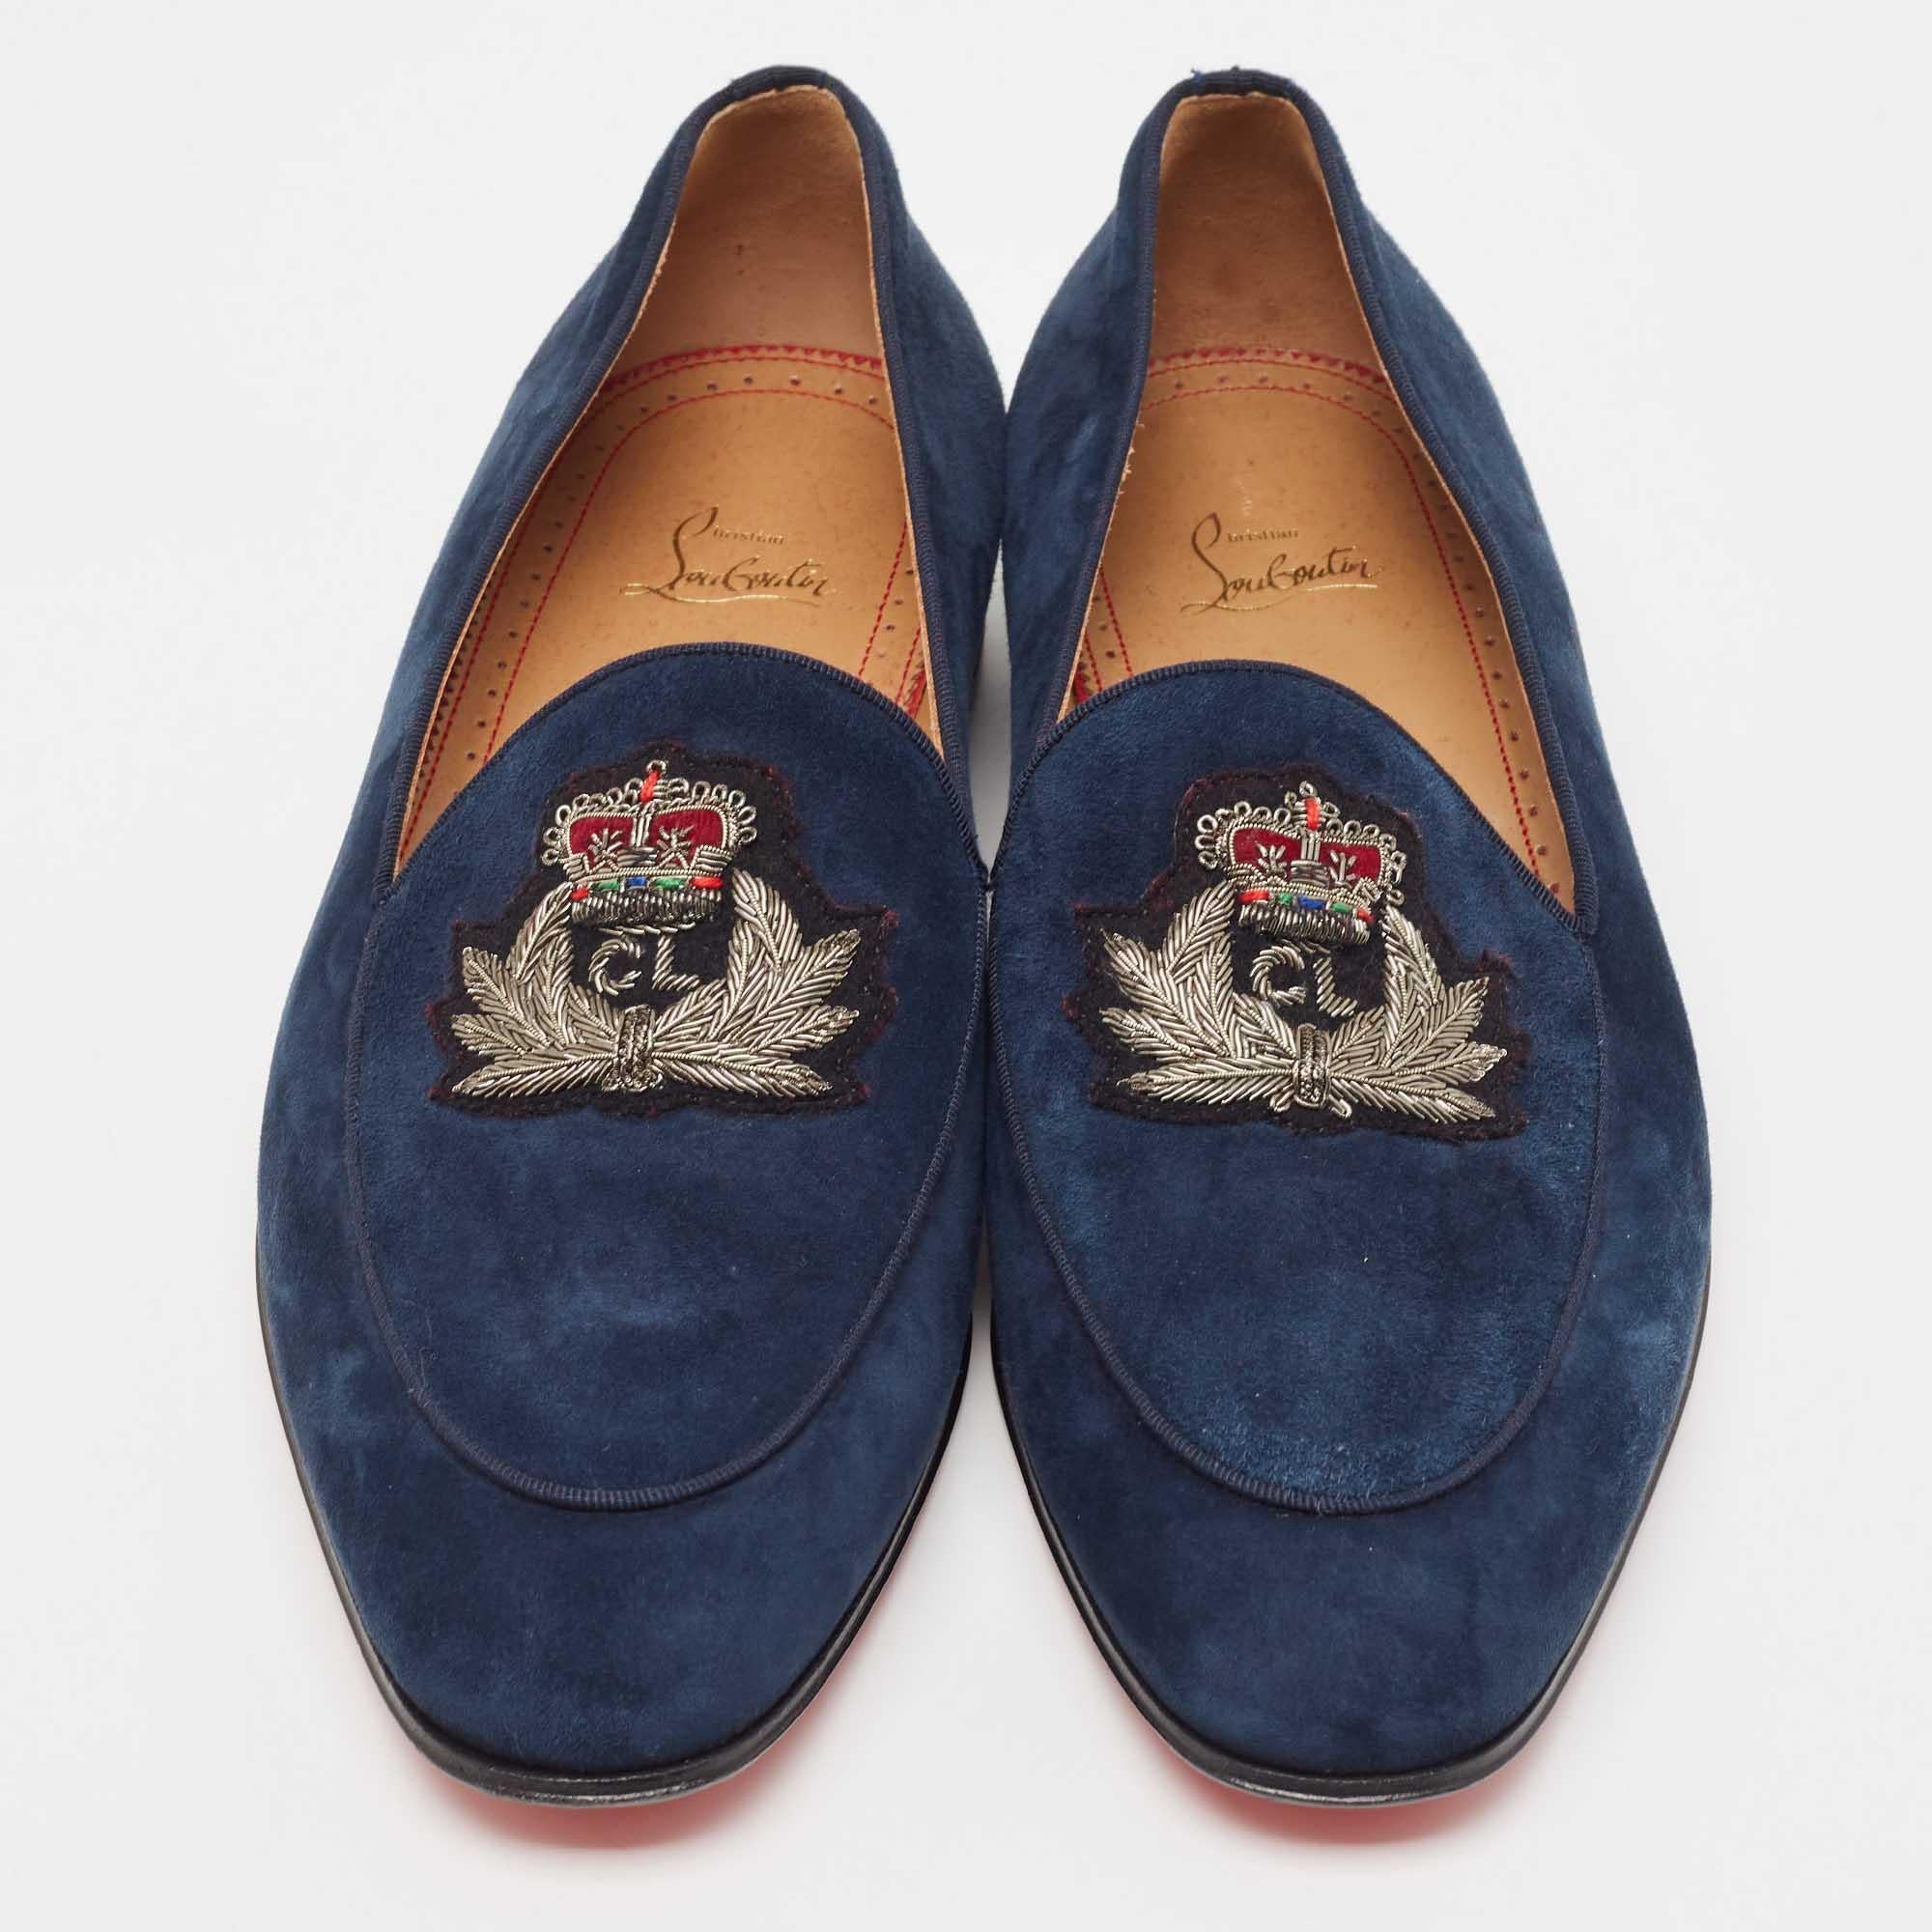 Practical, fashionable, and durable—these designer loafers are carefully built to be fine companions to your everyday style. They come made using the best materials to be a prized buy.

Includes: Original Dustbag

